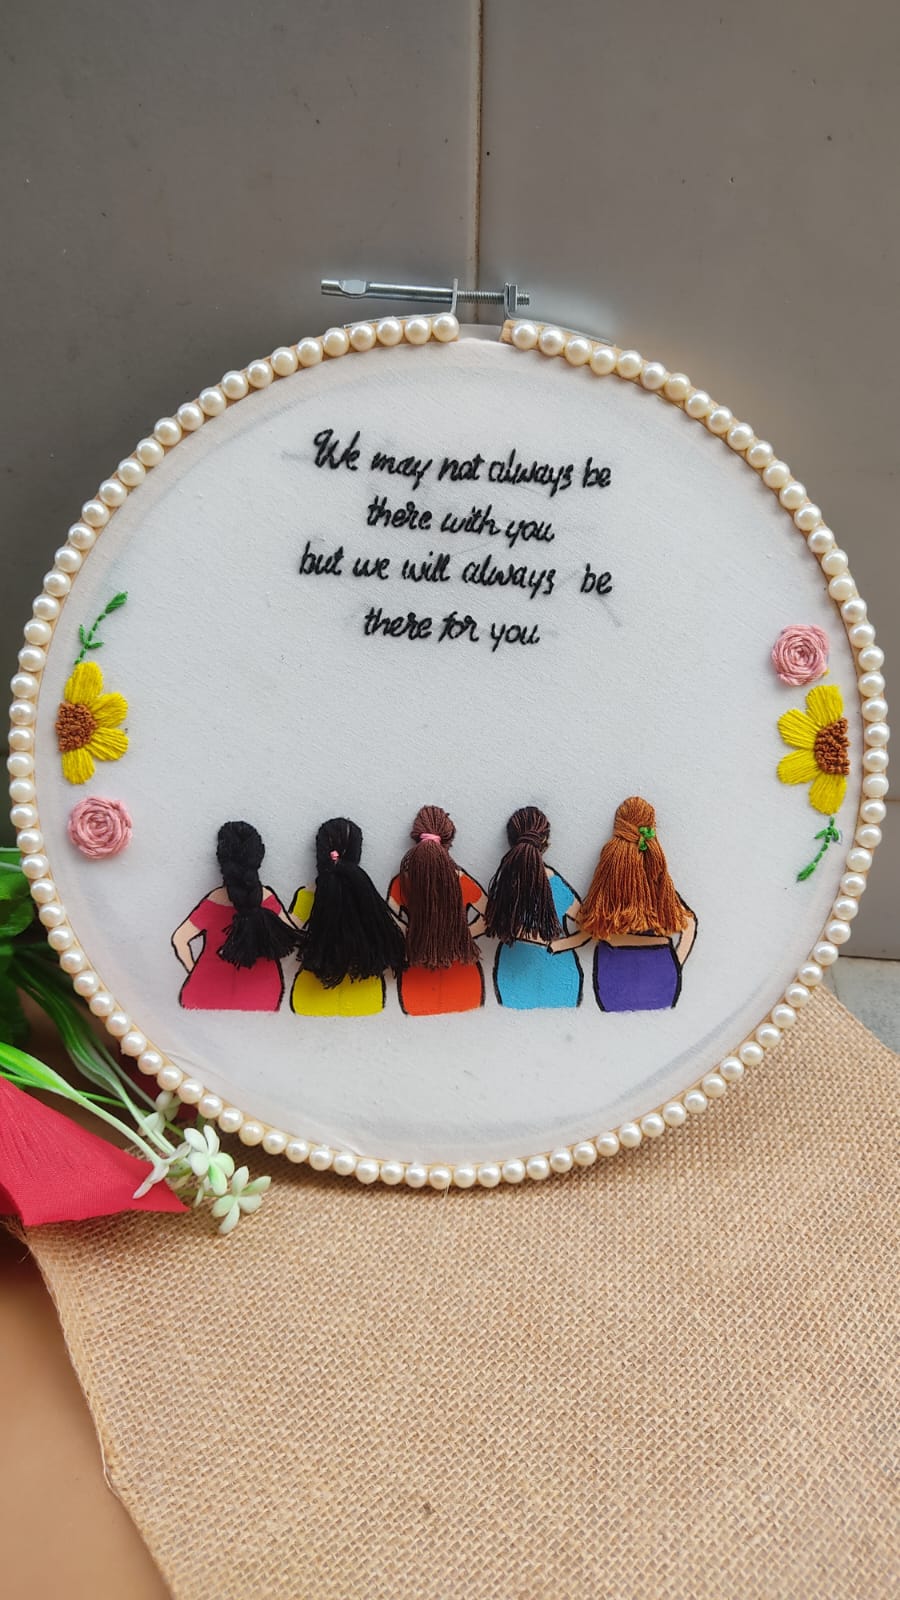 Best friends girl gang embroidery hoop frame with sunflowers and pearls